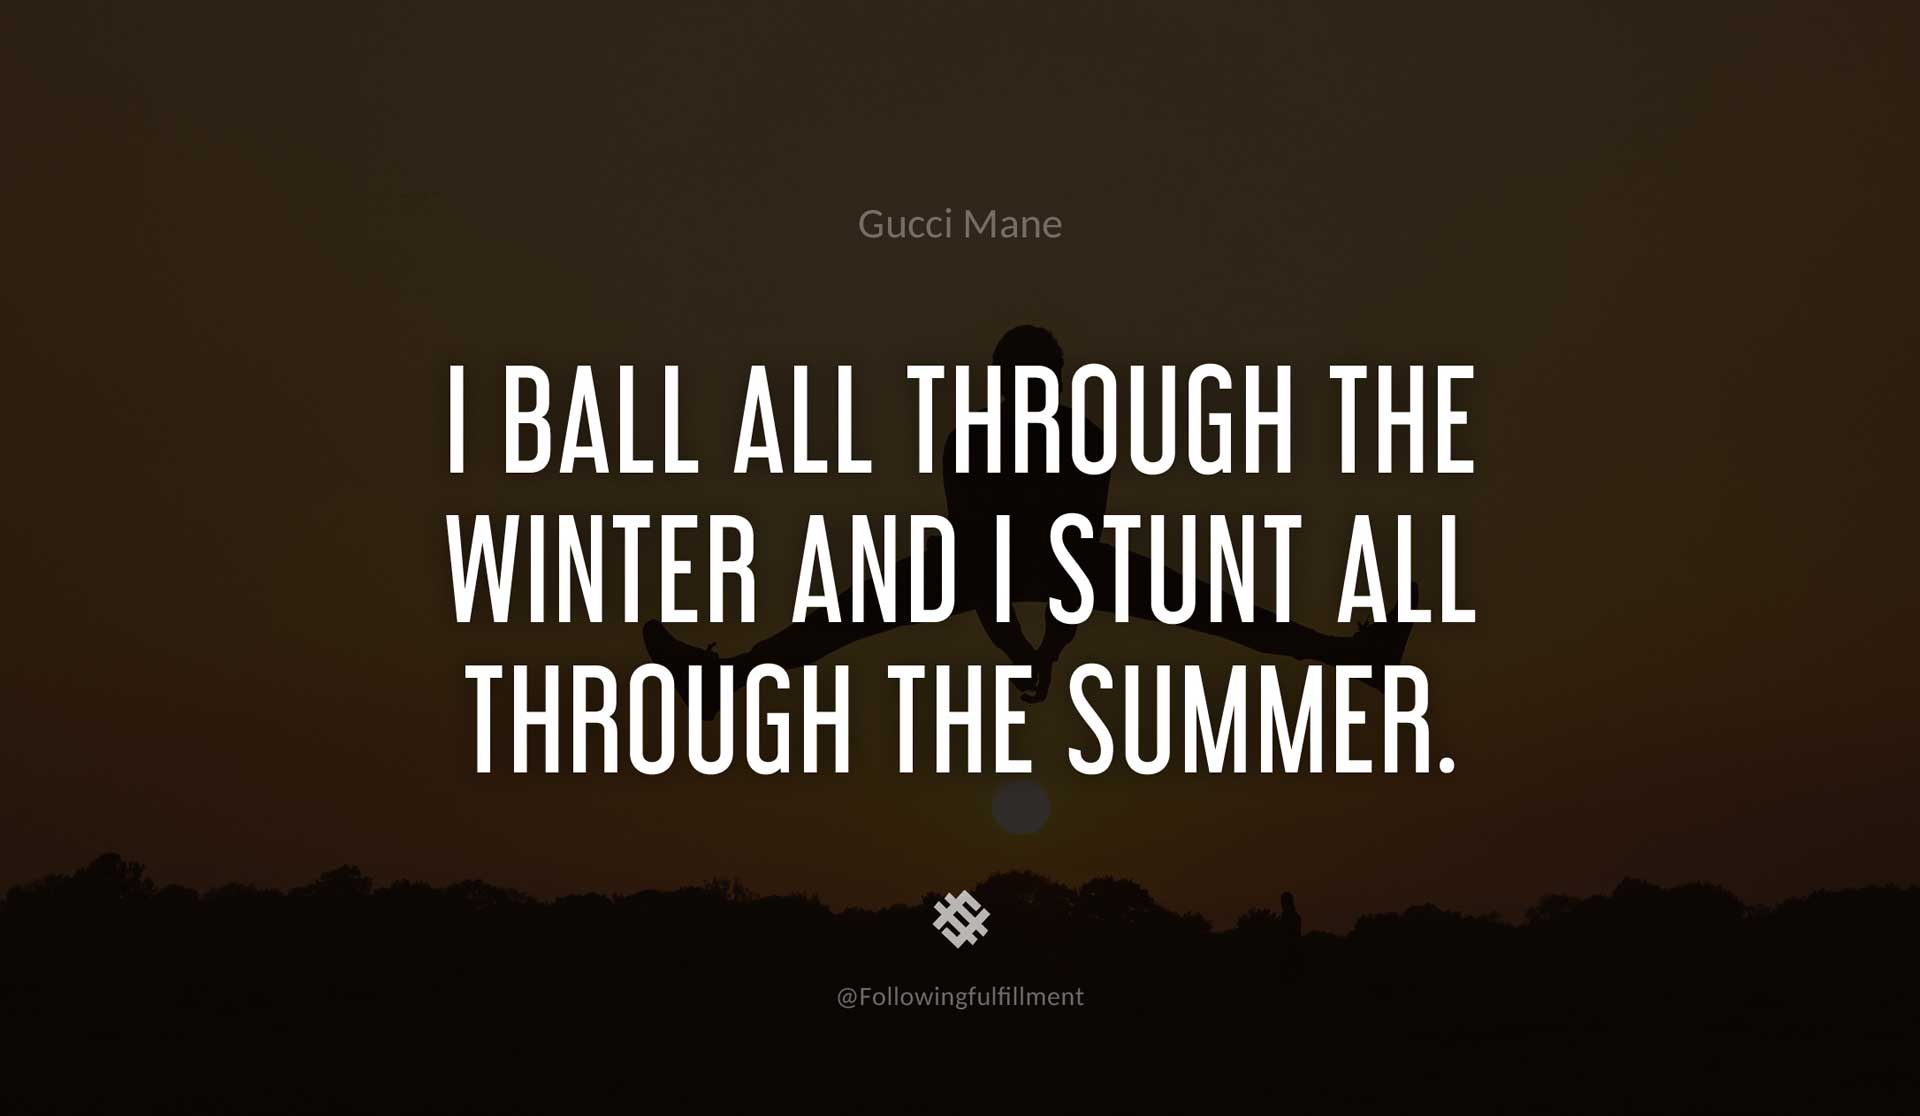 I-ball-all-through-the-winter-and-I-stunt-all-through-the-summer.-GUCCI-MANE-Quote.jpg